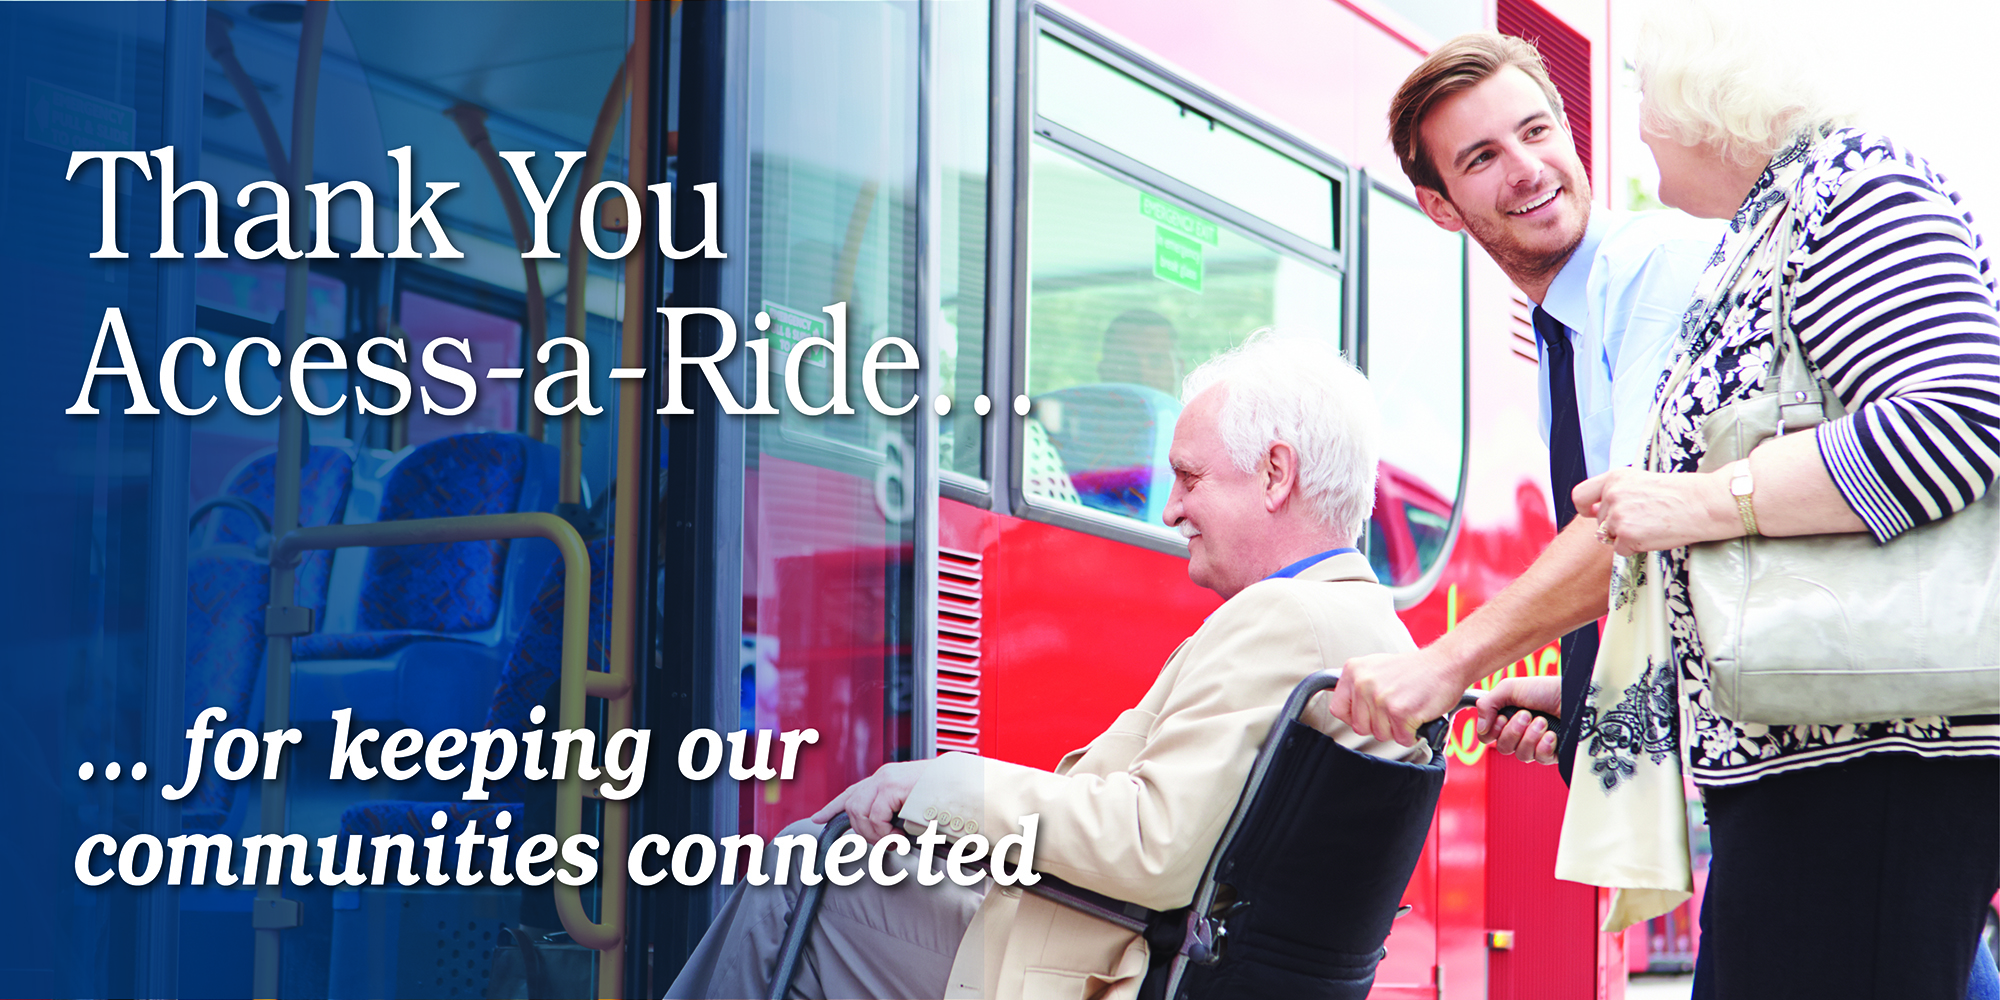 Thank you access-a-ride for keeping our communities connected